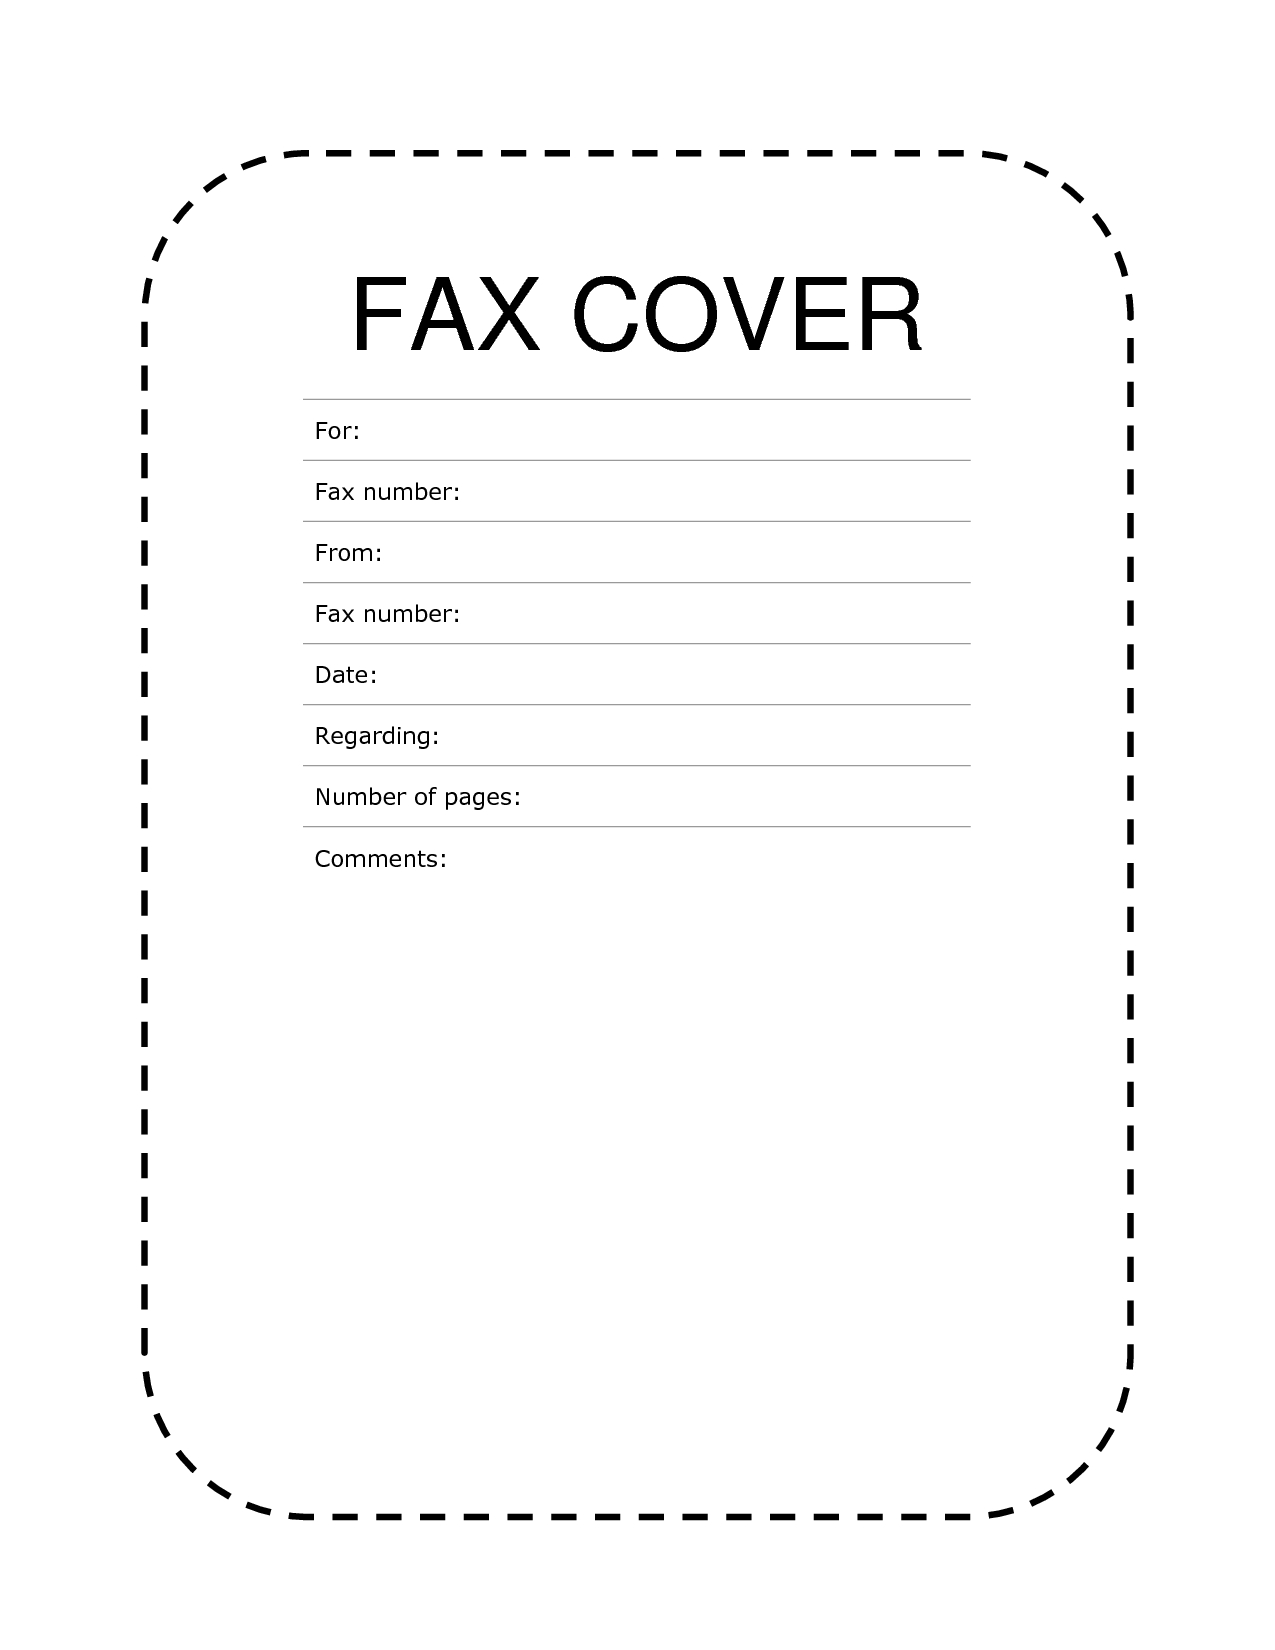 Free Fax Cover Sheet Template Format Example Pdf Printable | Fax - Free Printable Fax Cover Sheet Pdf